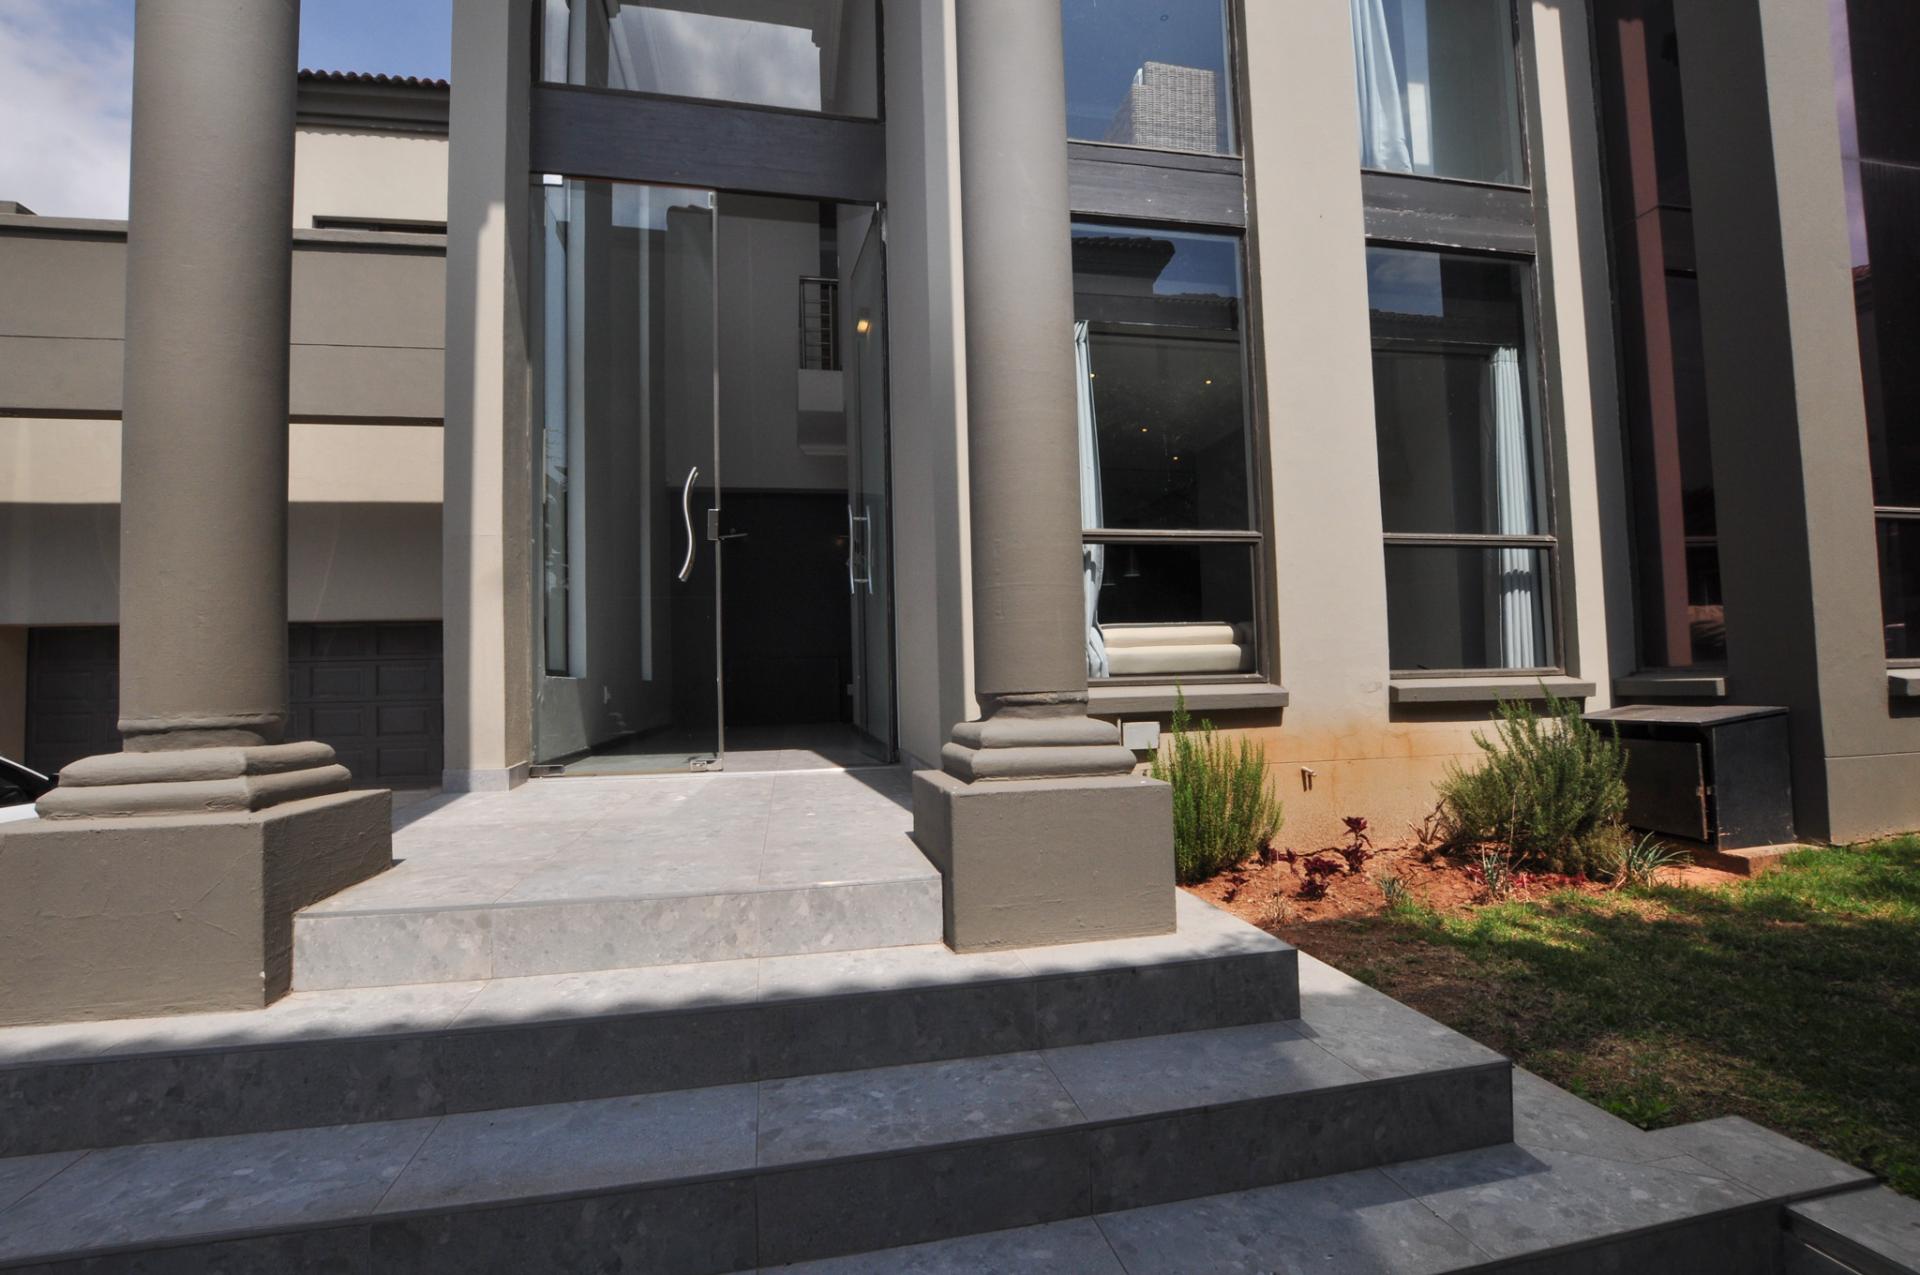 Fully Furnished 4 Bedroom Townhouse For Rent in Bryanston